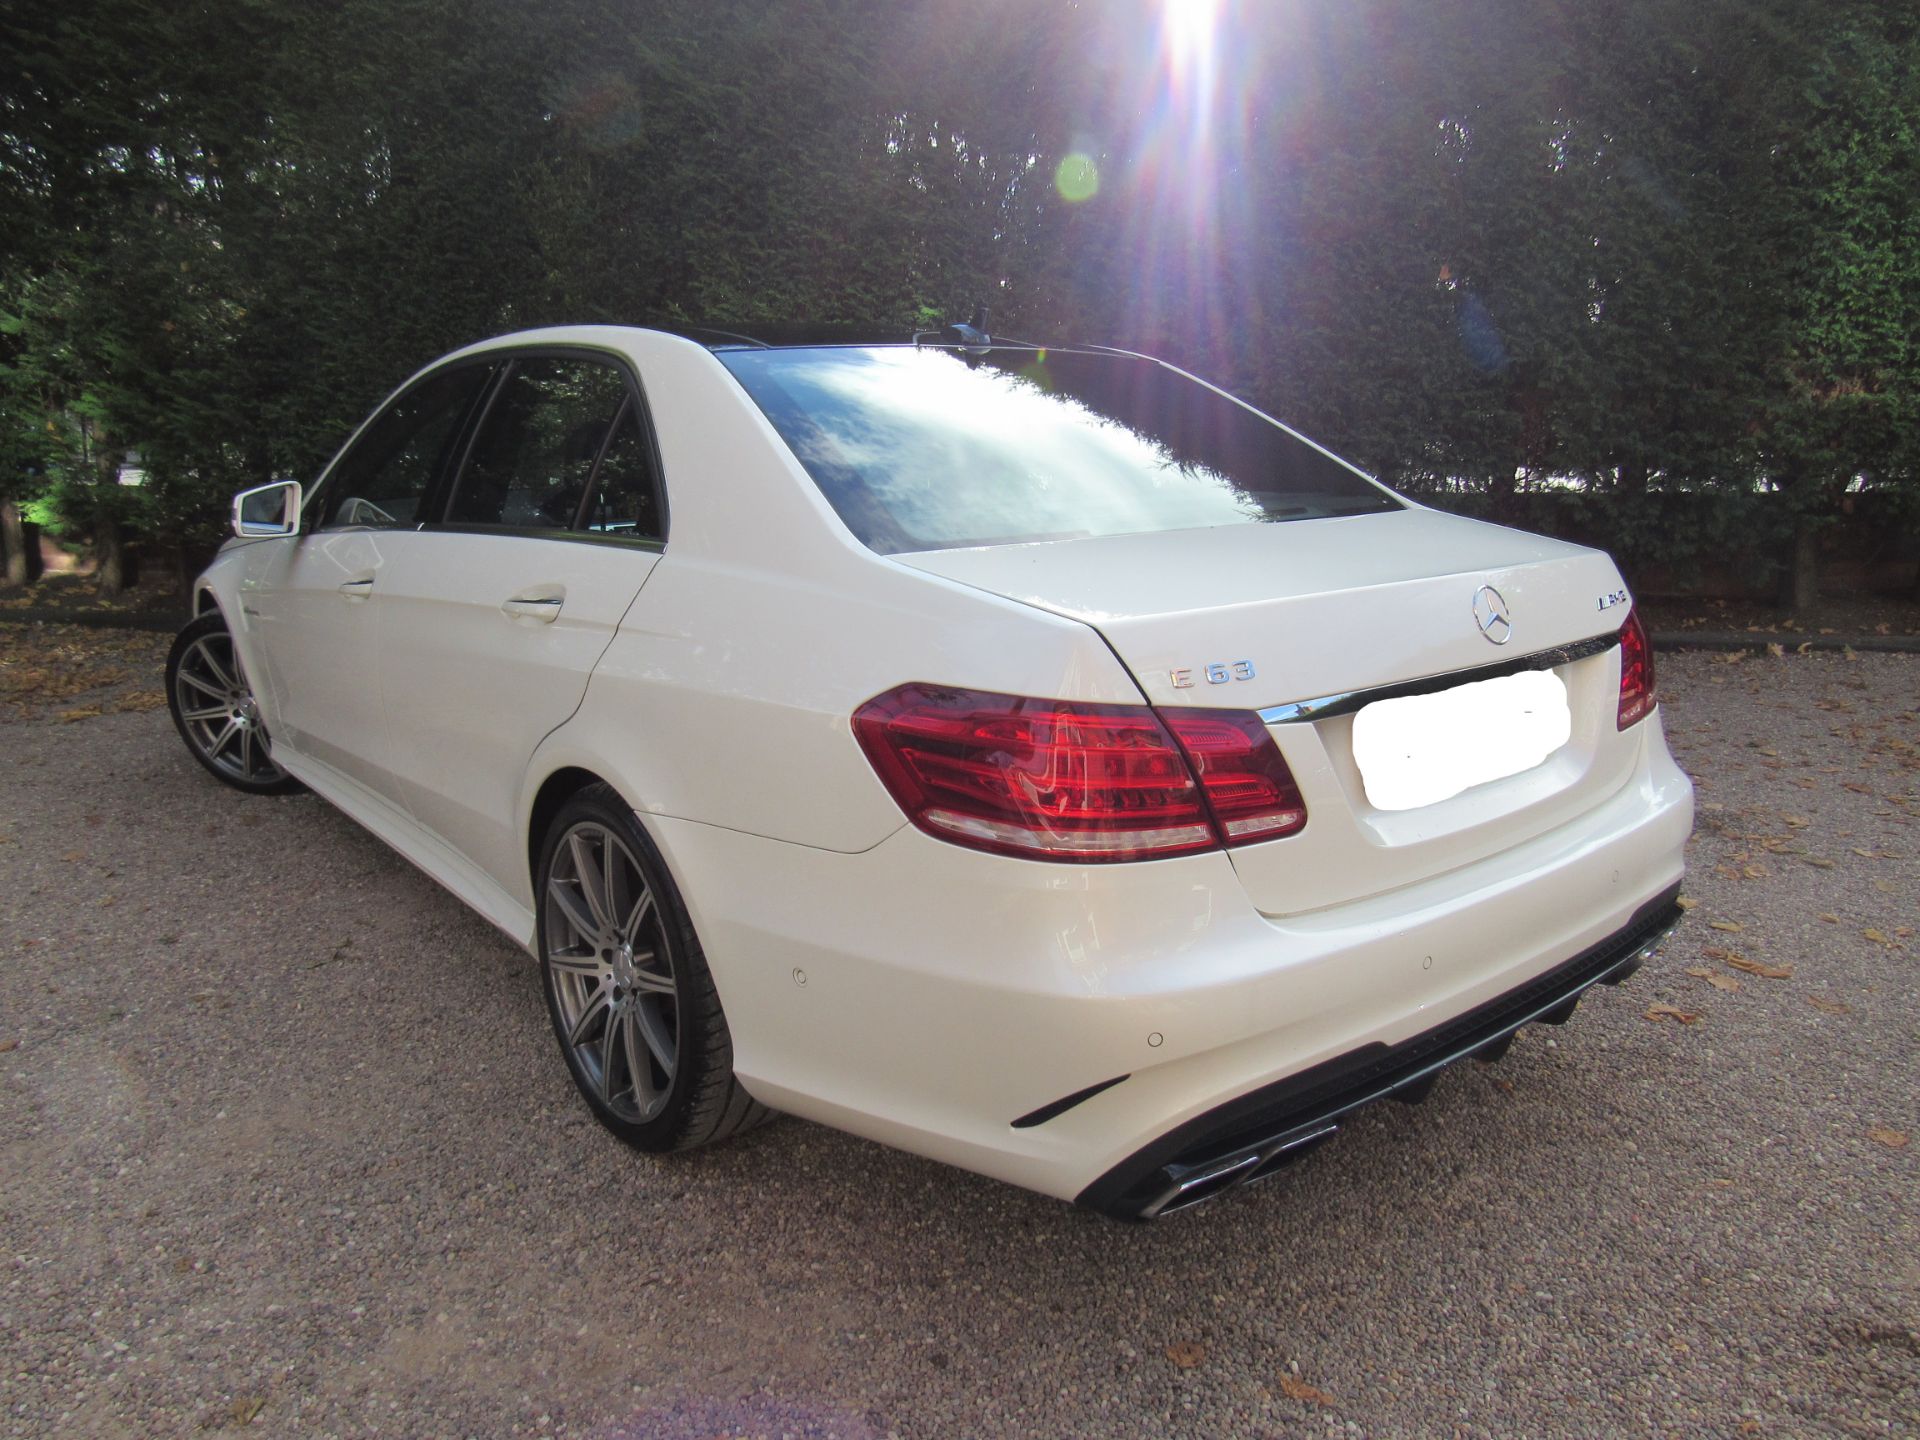 Mercedes-Benz E63 AMG Saloon - Registered 2013 - 33000 miles - This care has full panoramic sunroof, - Image 6 of 15